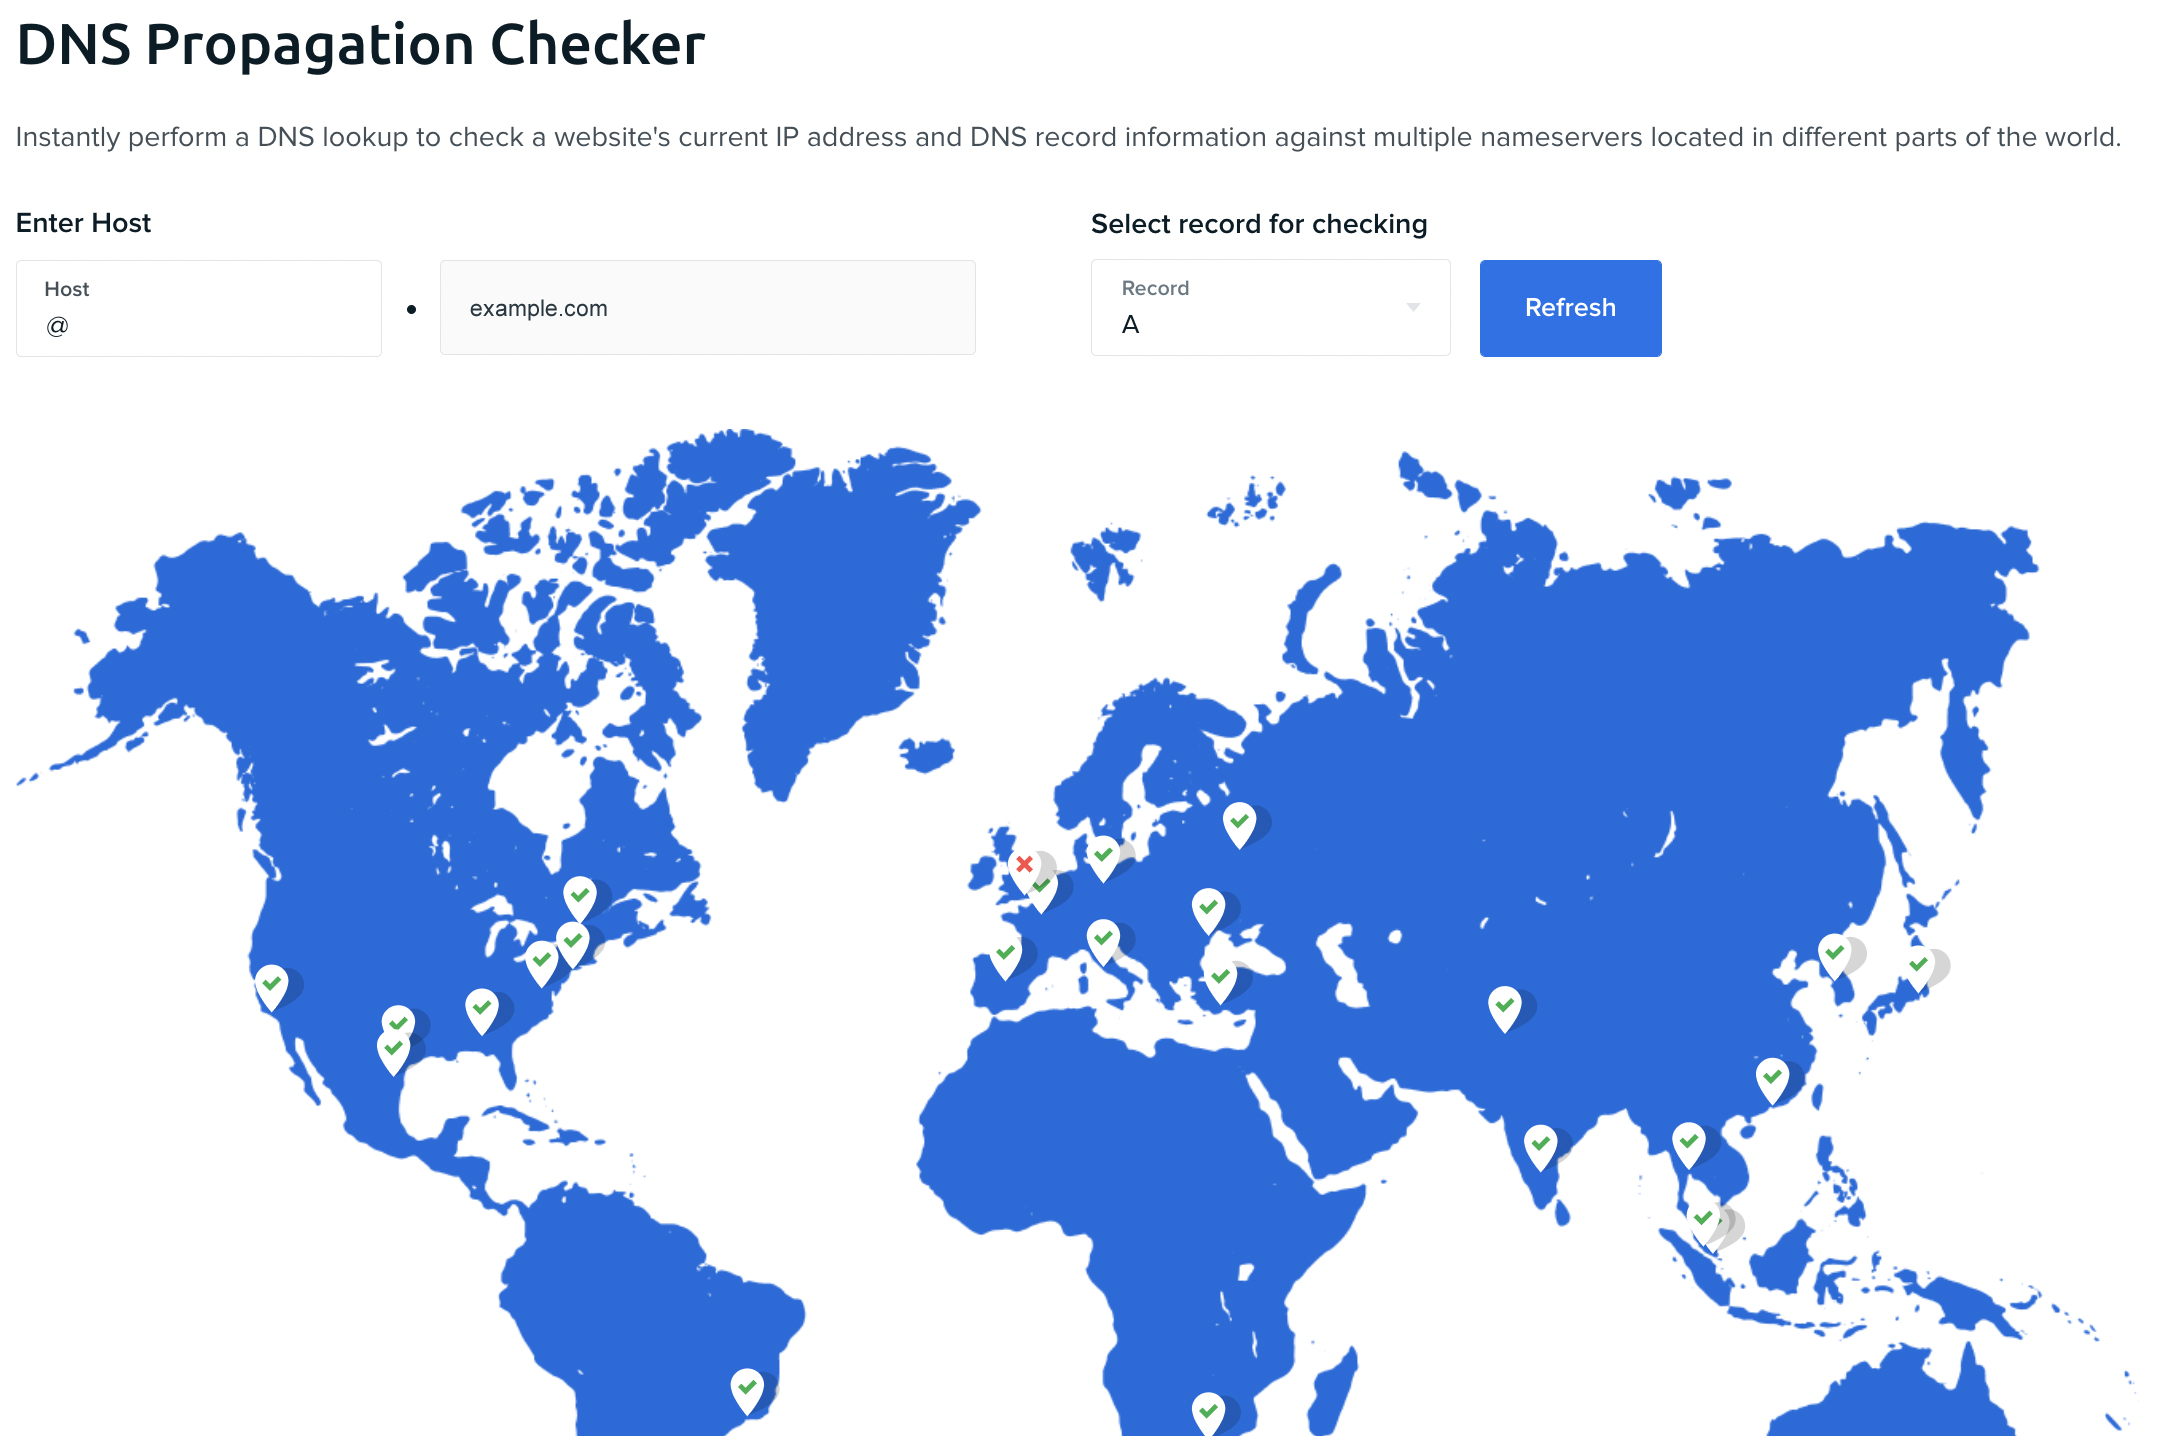 panel-websites-dns-propagation-checker-map.png